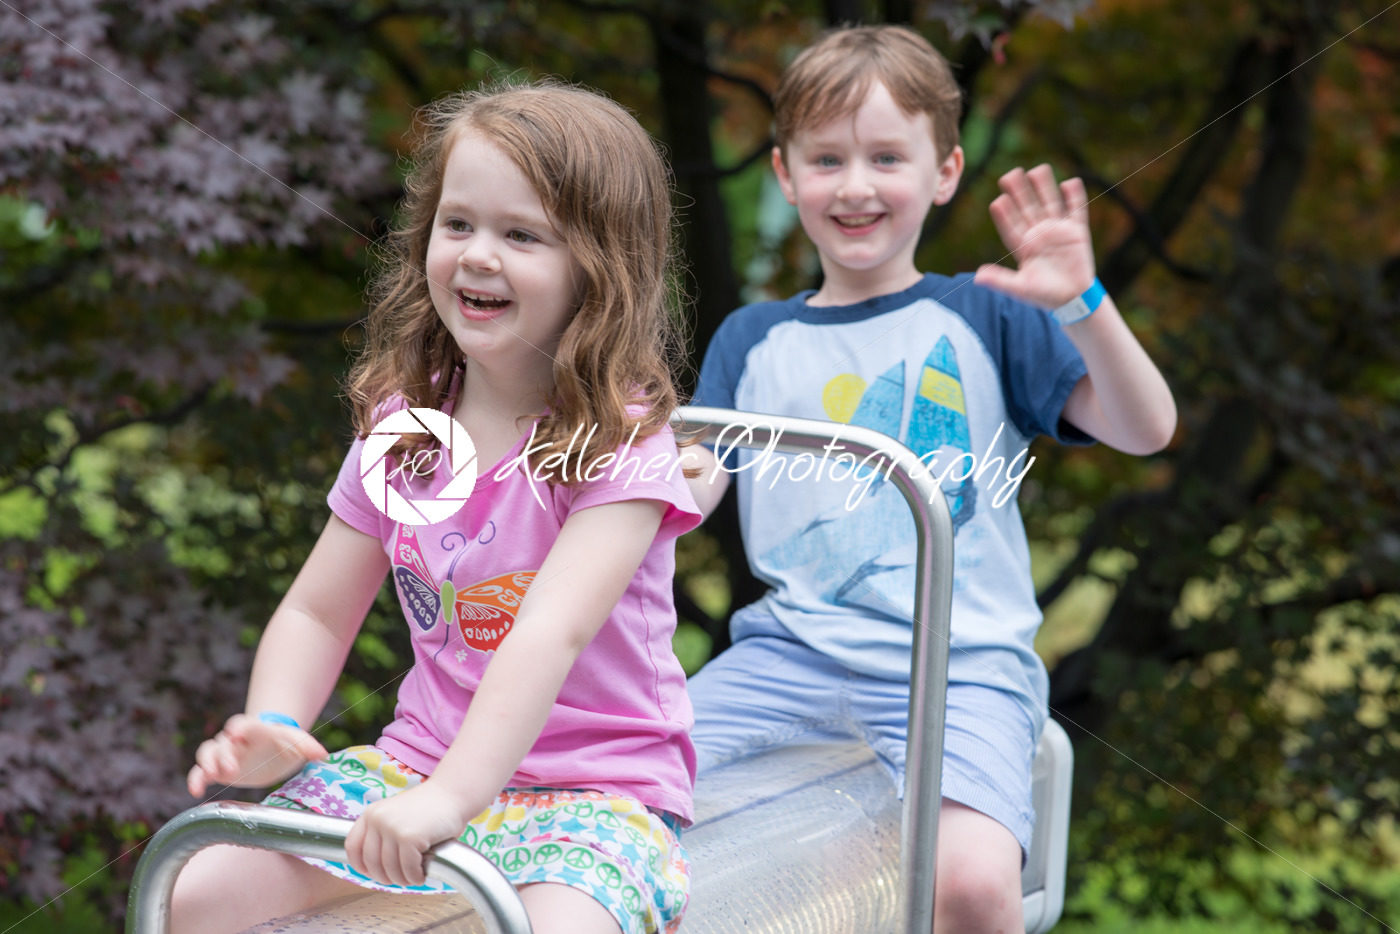 Happy brother and sister playing in park - Kelleher Photography Store